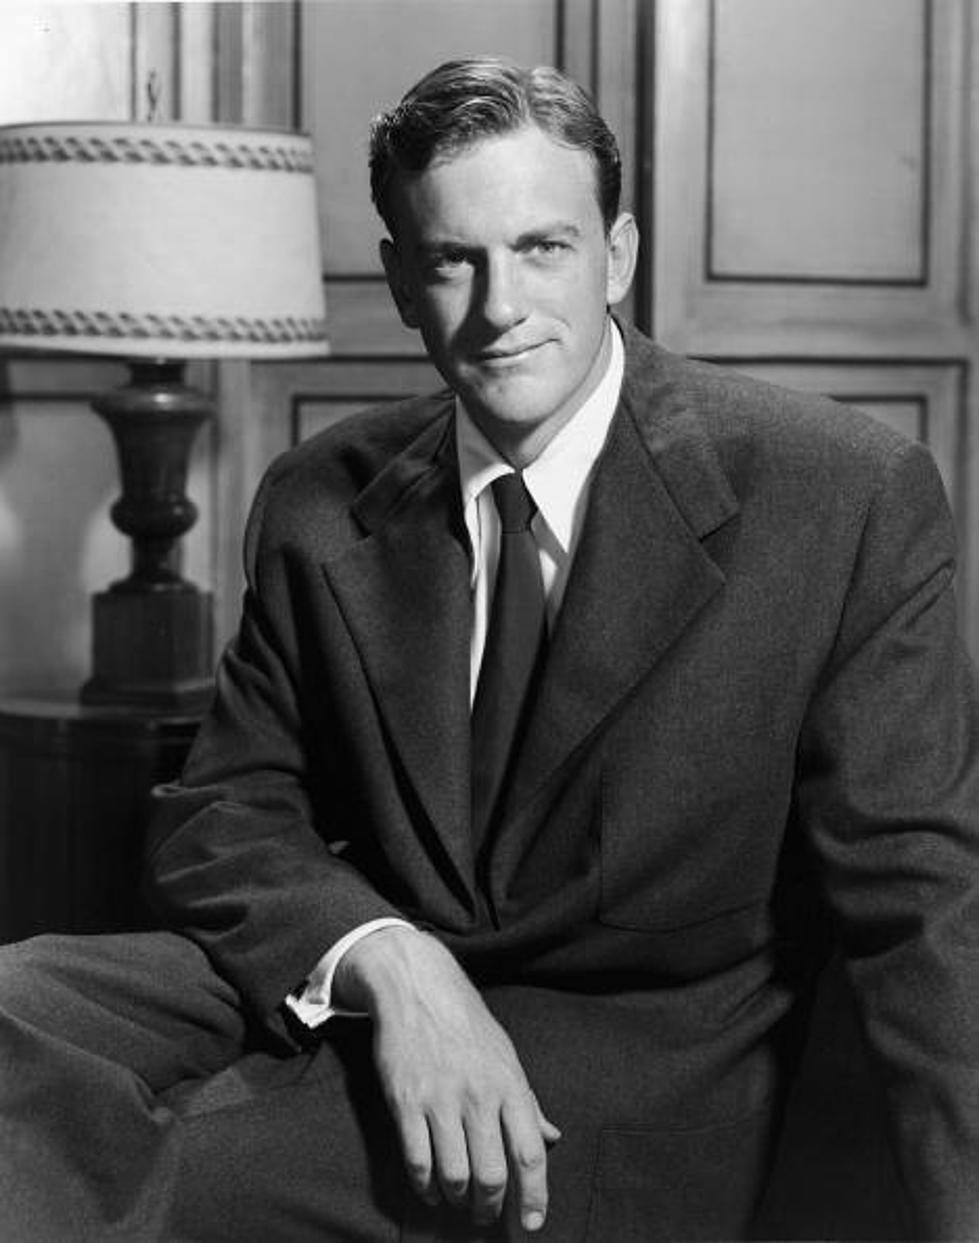 James Arness: Rest In Peace, Marshall Dillon